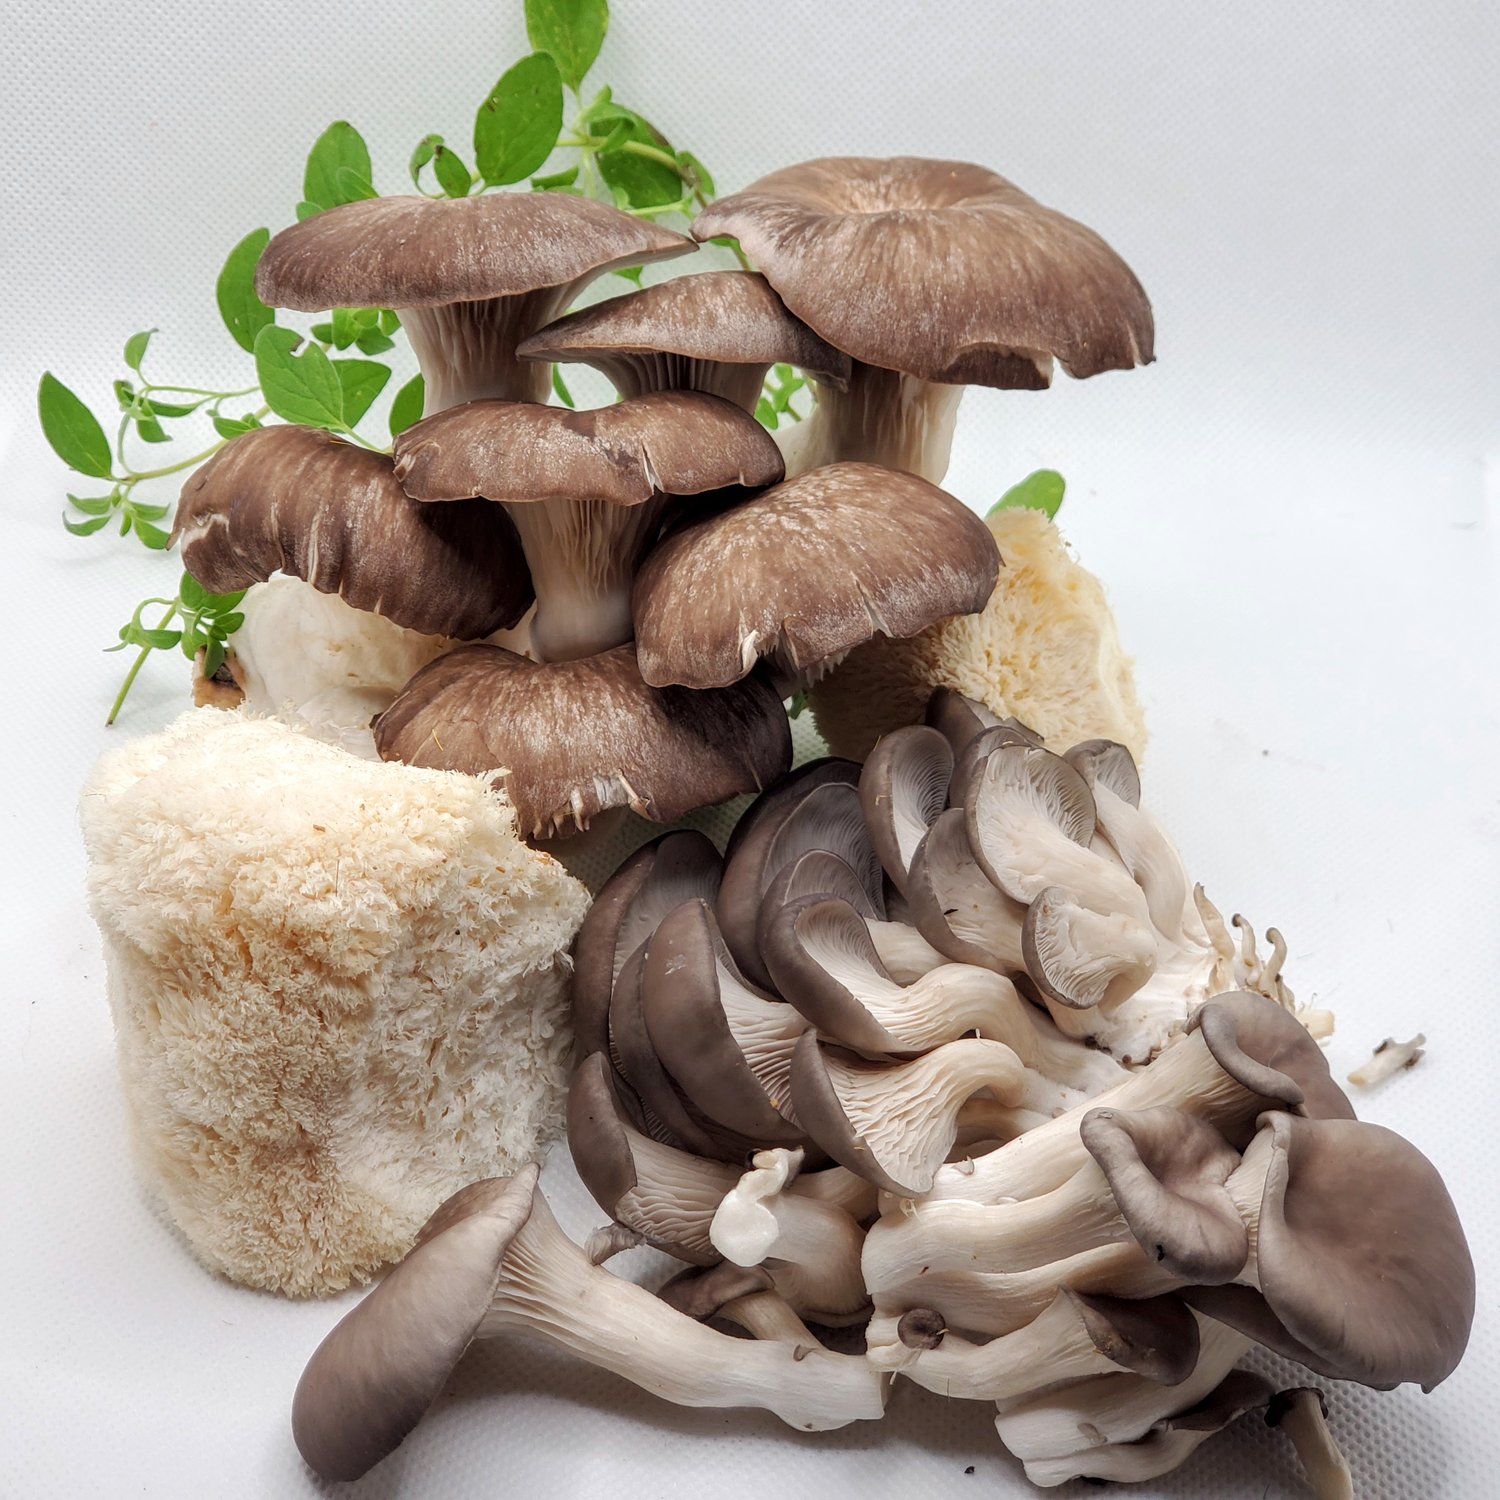 New Mexico State University’s College of Agricultural, Consumer and Environmental Sciences will host free virtual mushroom cooking demonstration Thursday, April 29, on Zoom. The free event is open to the public and will include a cooking demonstration with mushrooms from Full Circle Mushrooms.